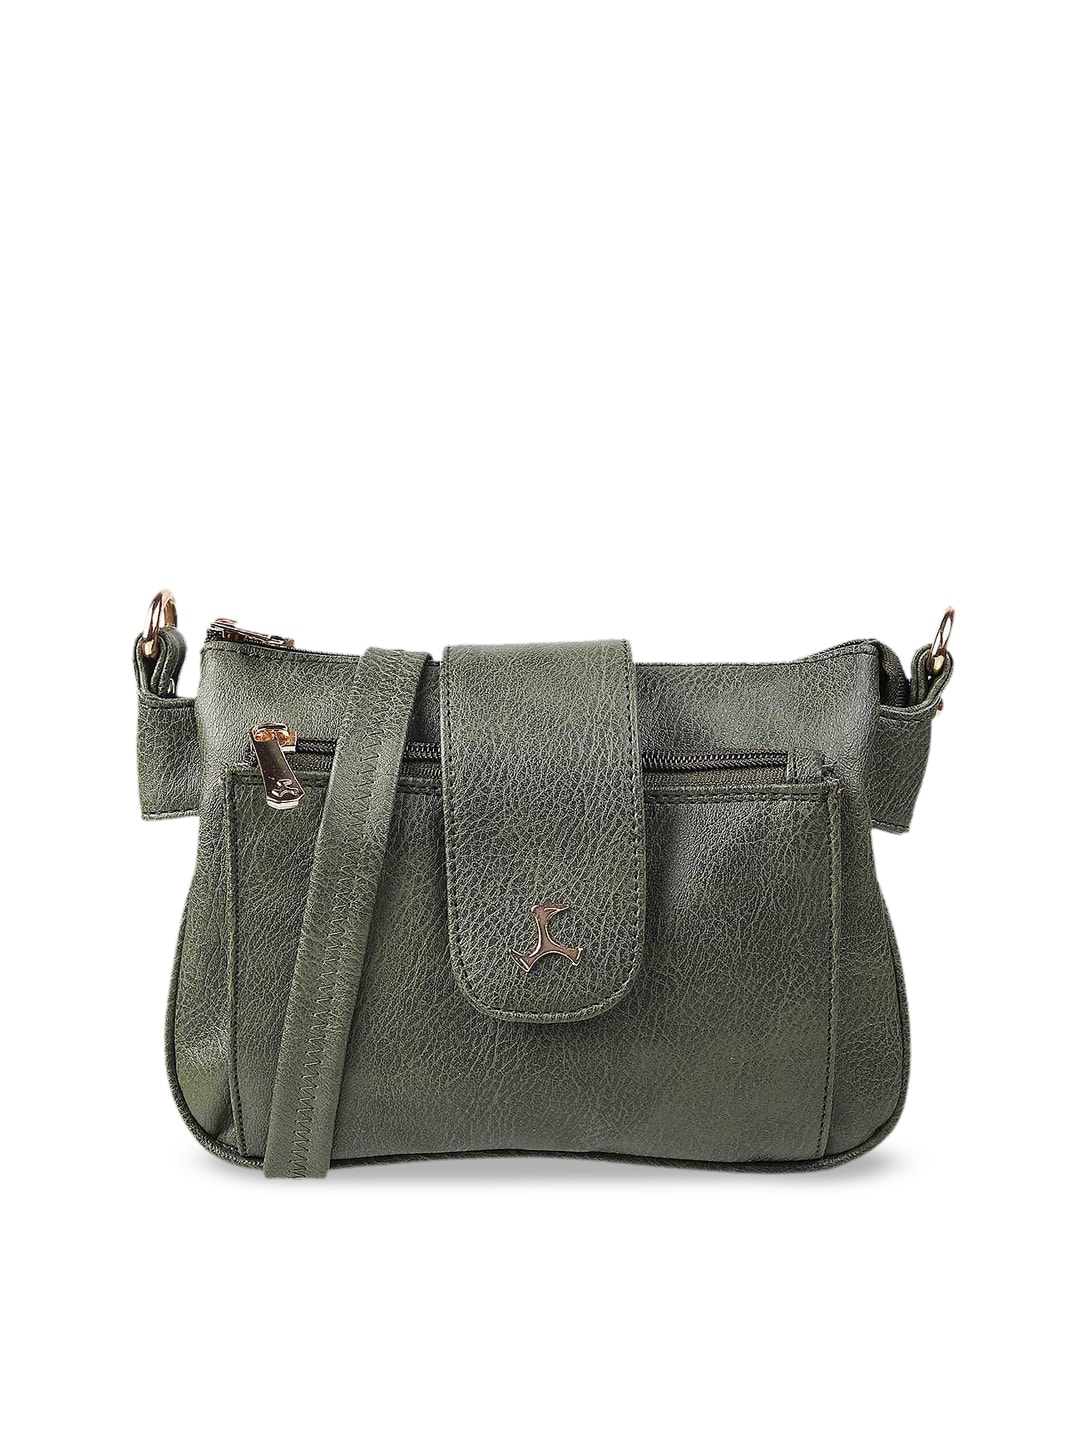 Mochi Green Textured PU Swagger Sling Bag Price in India